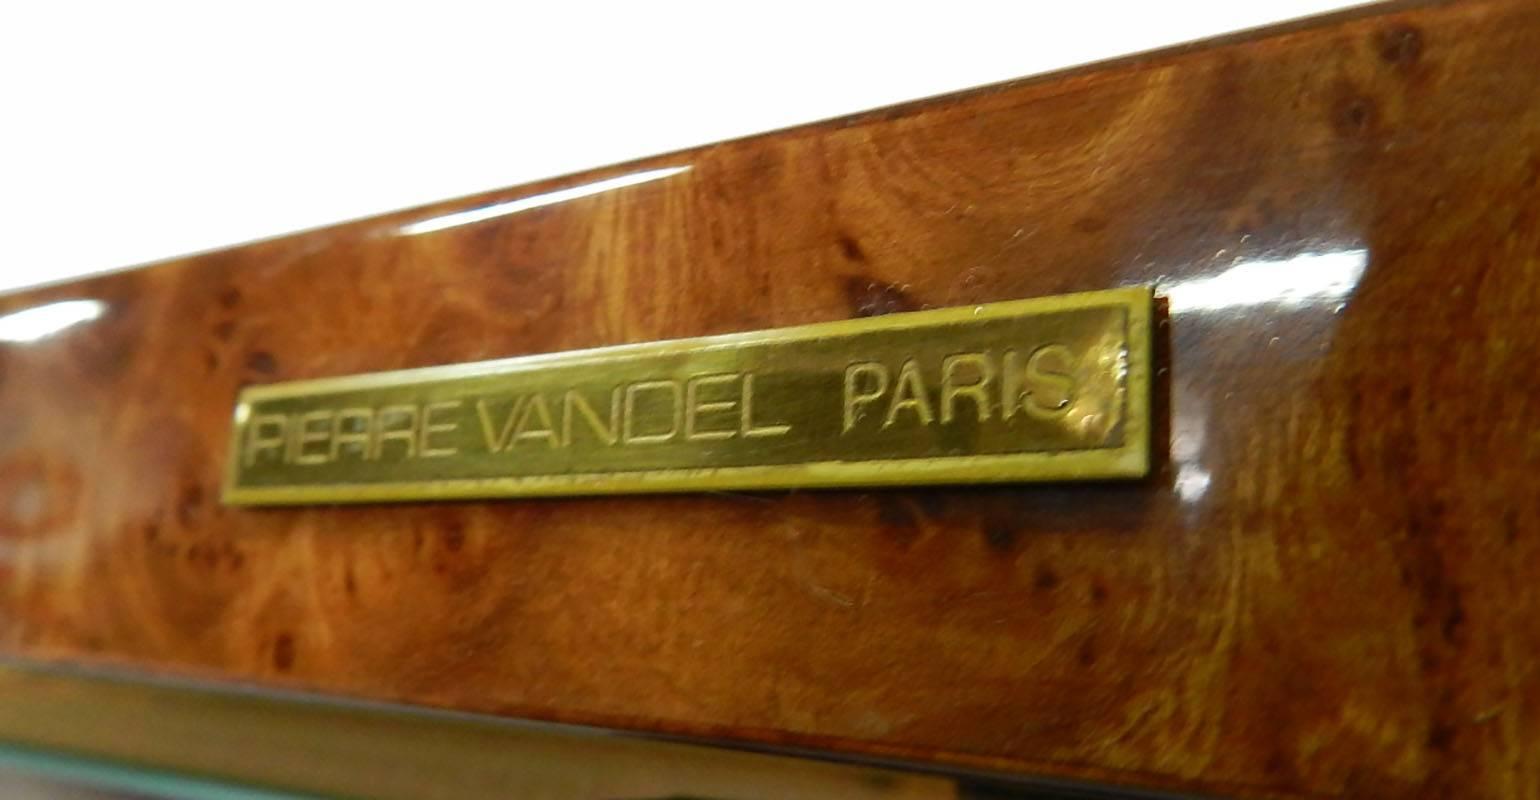 Pair of Pierre Vandel Vitrines French midcentury, circa 1970
Illuminated showcase cabinets
Original labels Pierre Vandel Paris
Each has an internal top light
Doors with locks and key
Glass shelves
High shine burr walnut top and base
Very good